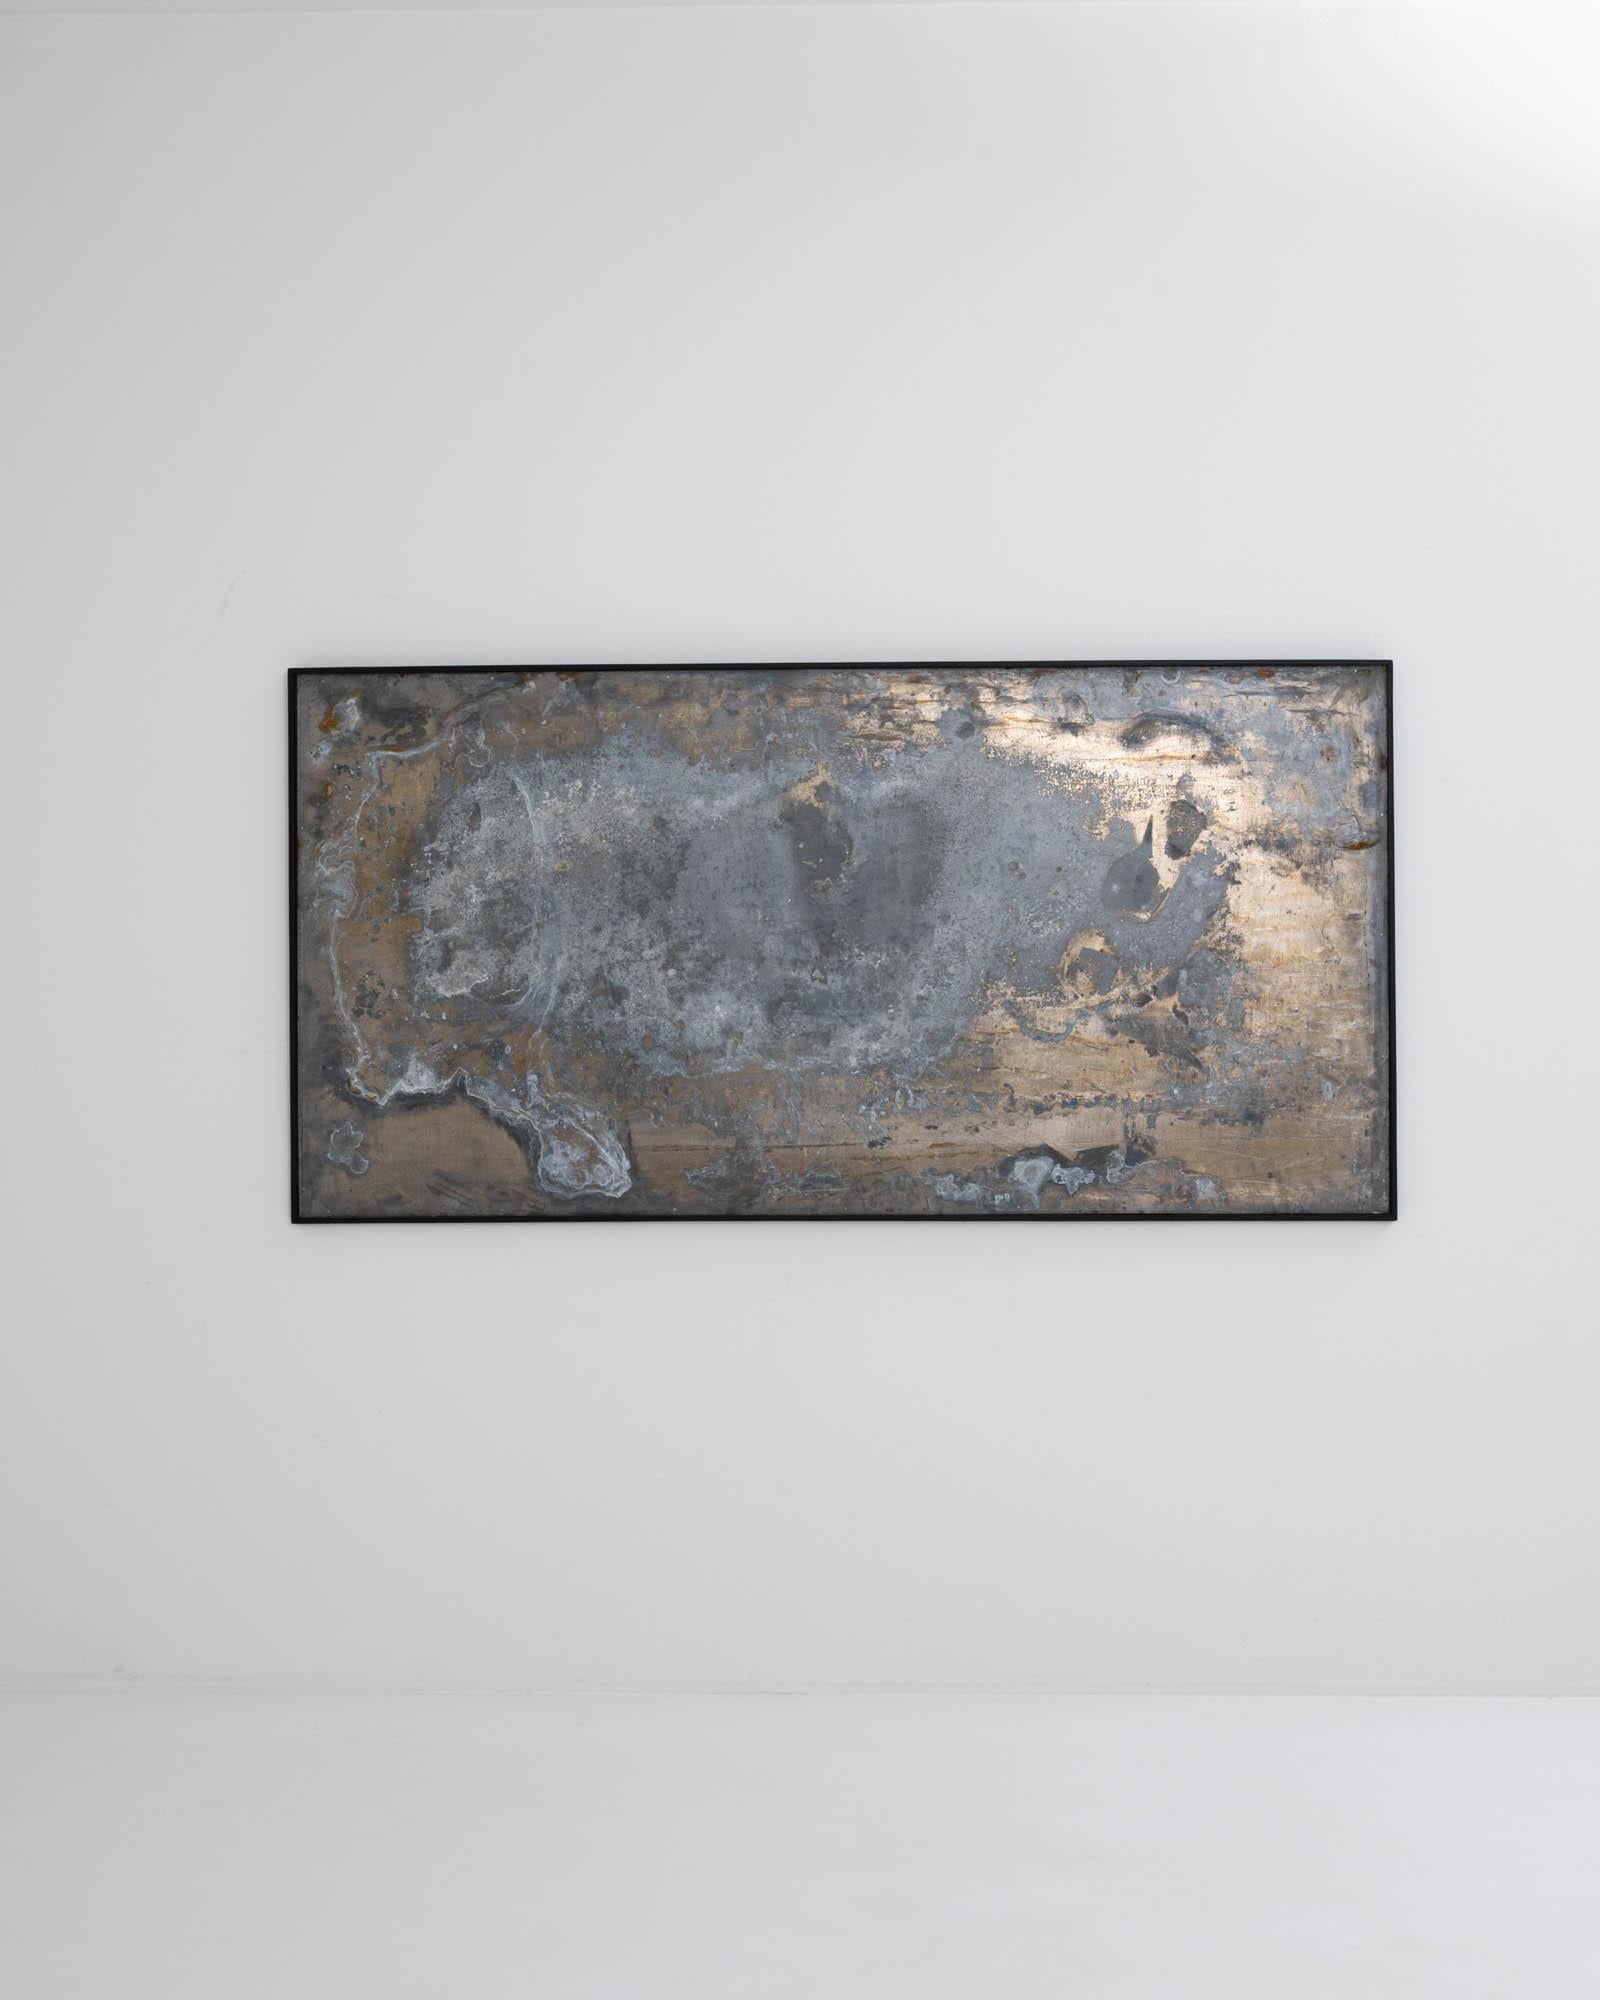 Muscular and enigmatic, this large-scale abstract artwork combines the hand of man and the hand of nature. The form has a minimalist simplicity: a broad sheet of metal is set within a wooden frame. The surface of the metal combines human